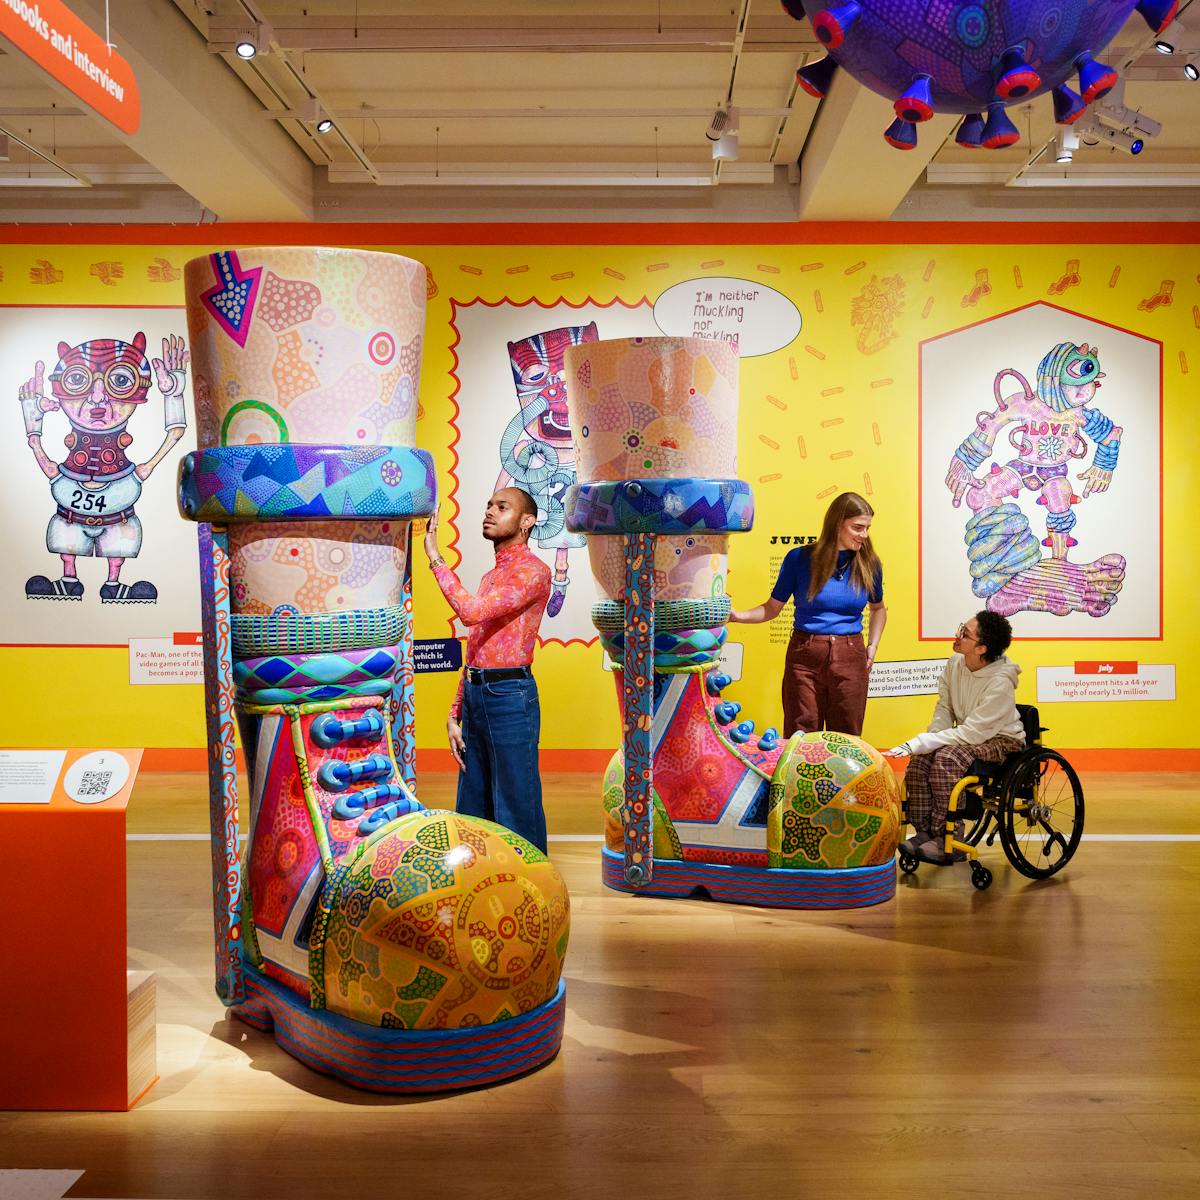 Photograph of a colourful exhibition space with three individuals exploring a large sculpture of a pair of boots with callipers. The sculpture is covered in colourful patterns and towers above their heads. On the wall in the background is a bright yellow mural containing drawings and text. 